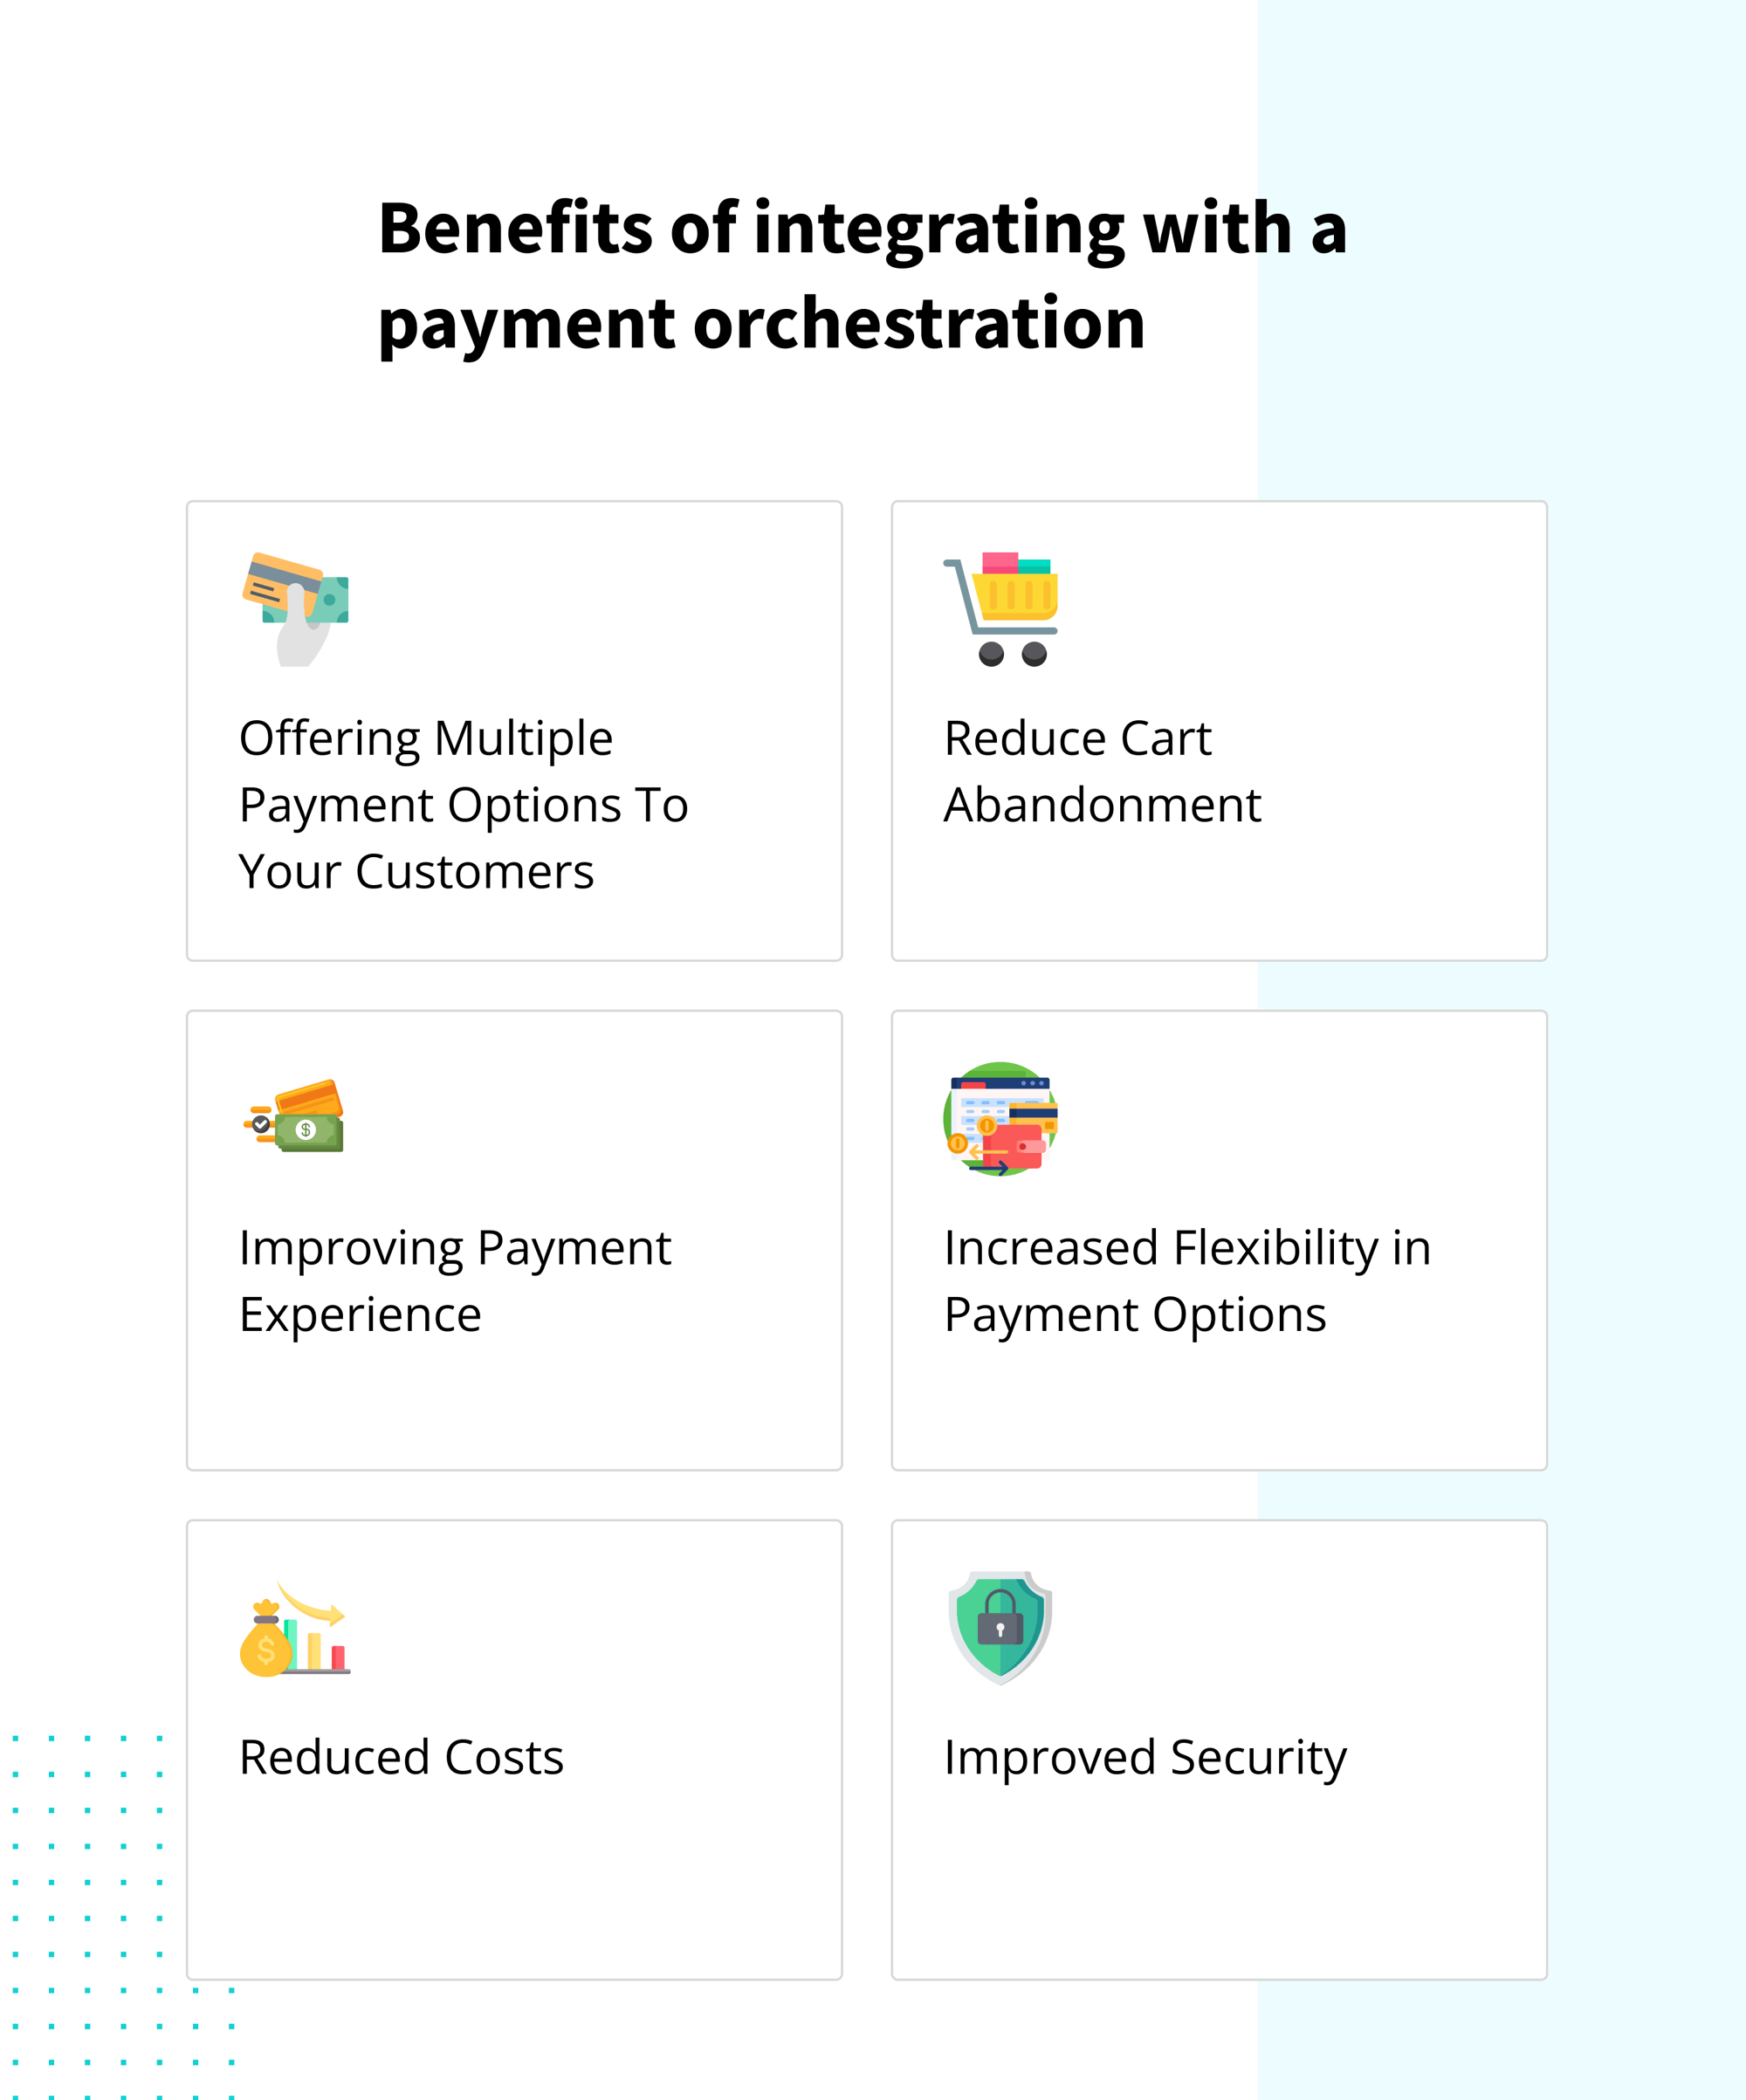 Benefits of integrating with a payment orchestration